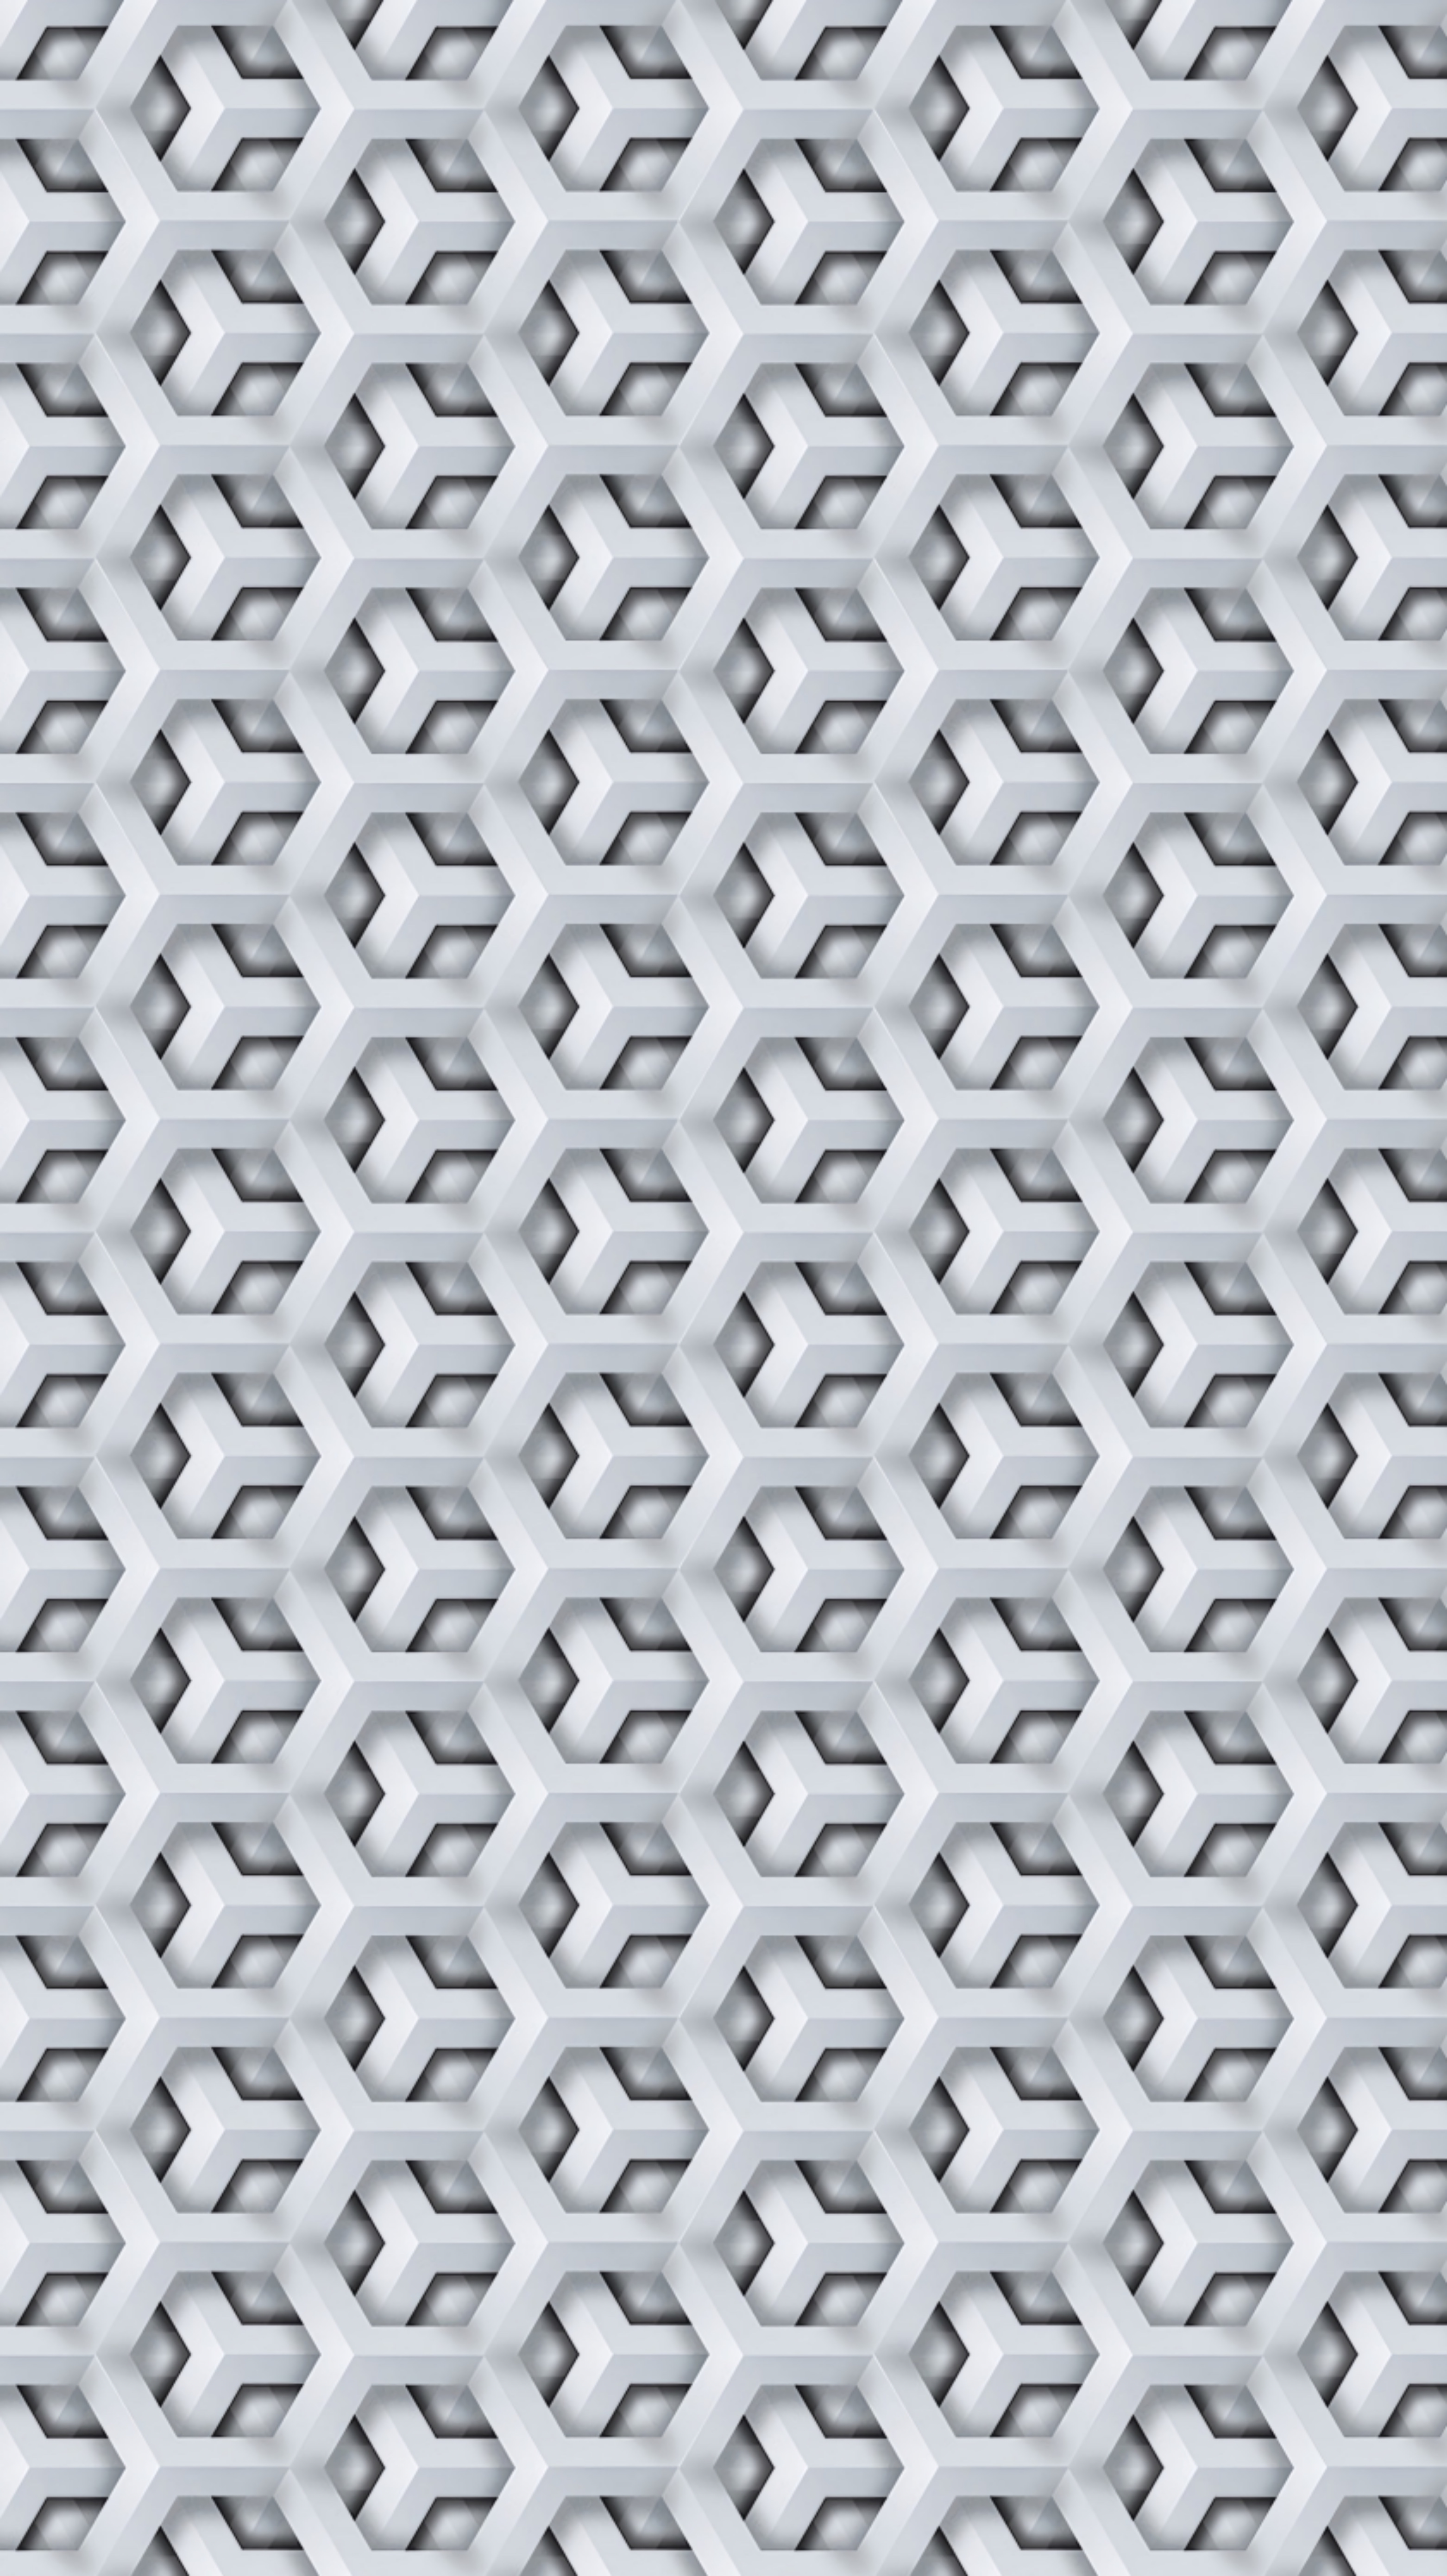 pattern, white, texture, textures, grid, pentagons Full HD